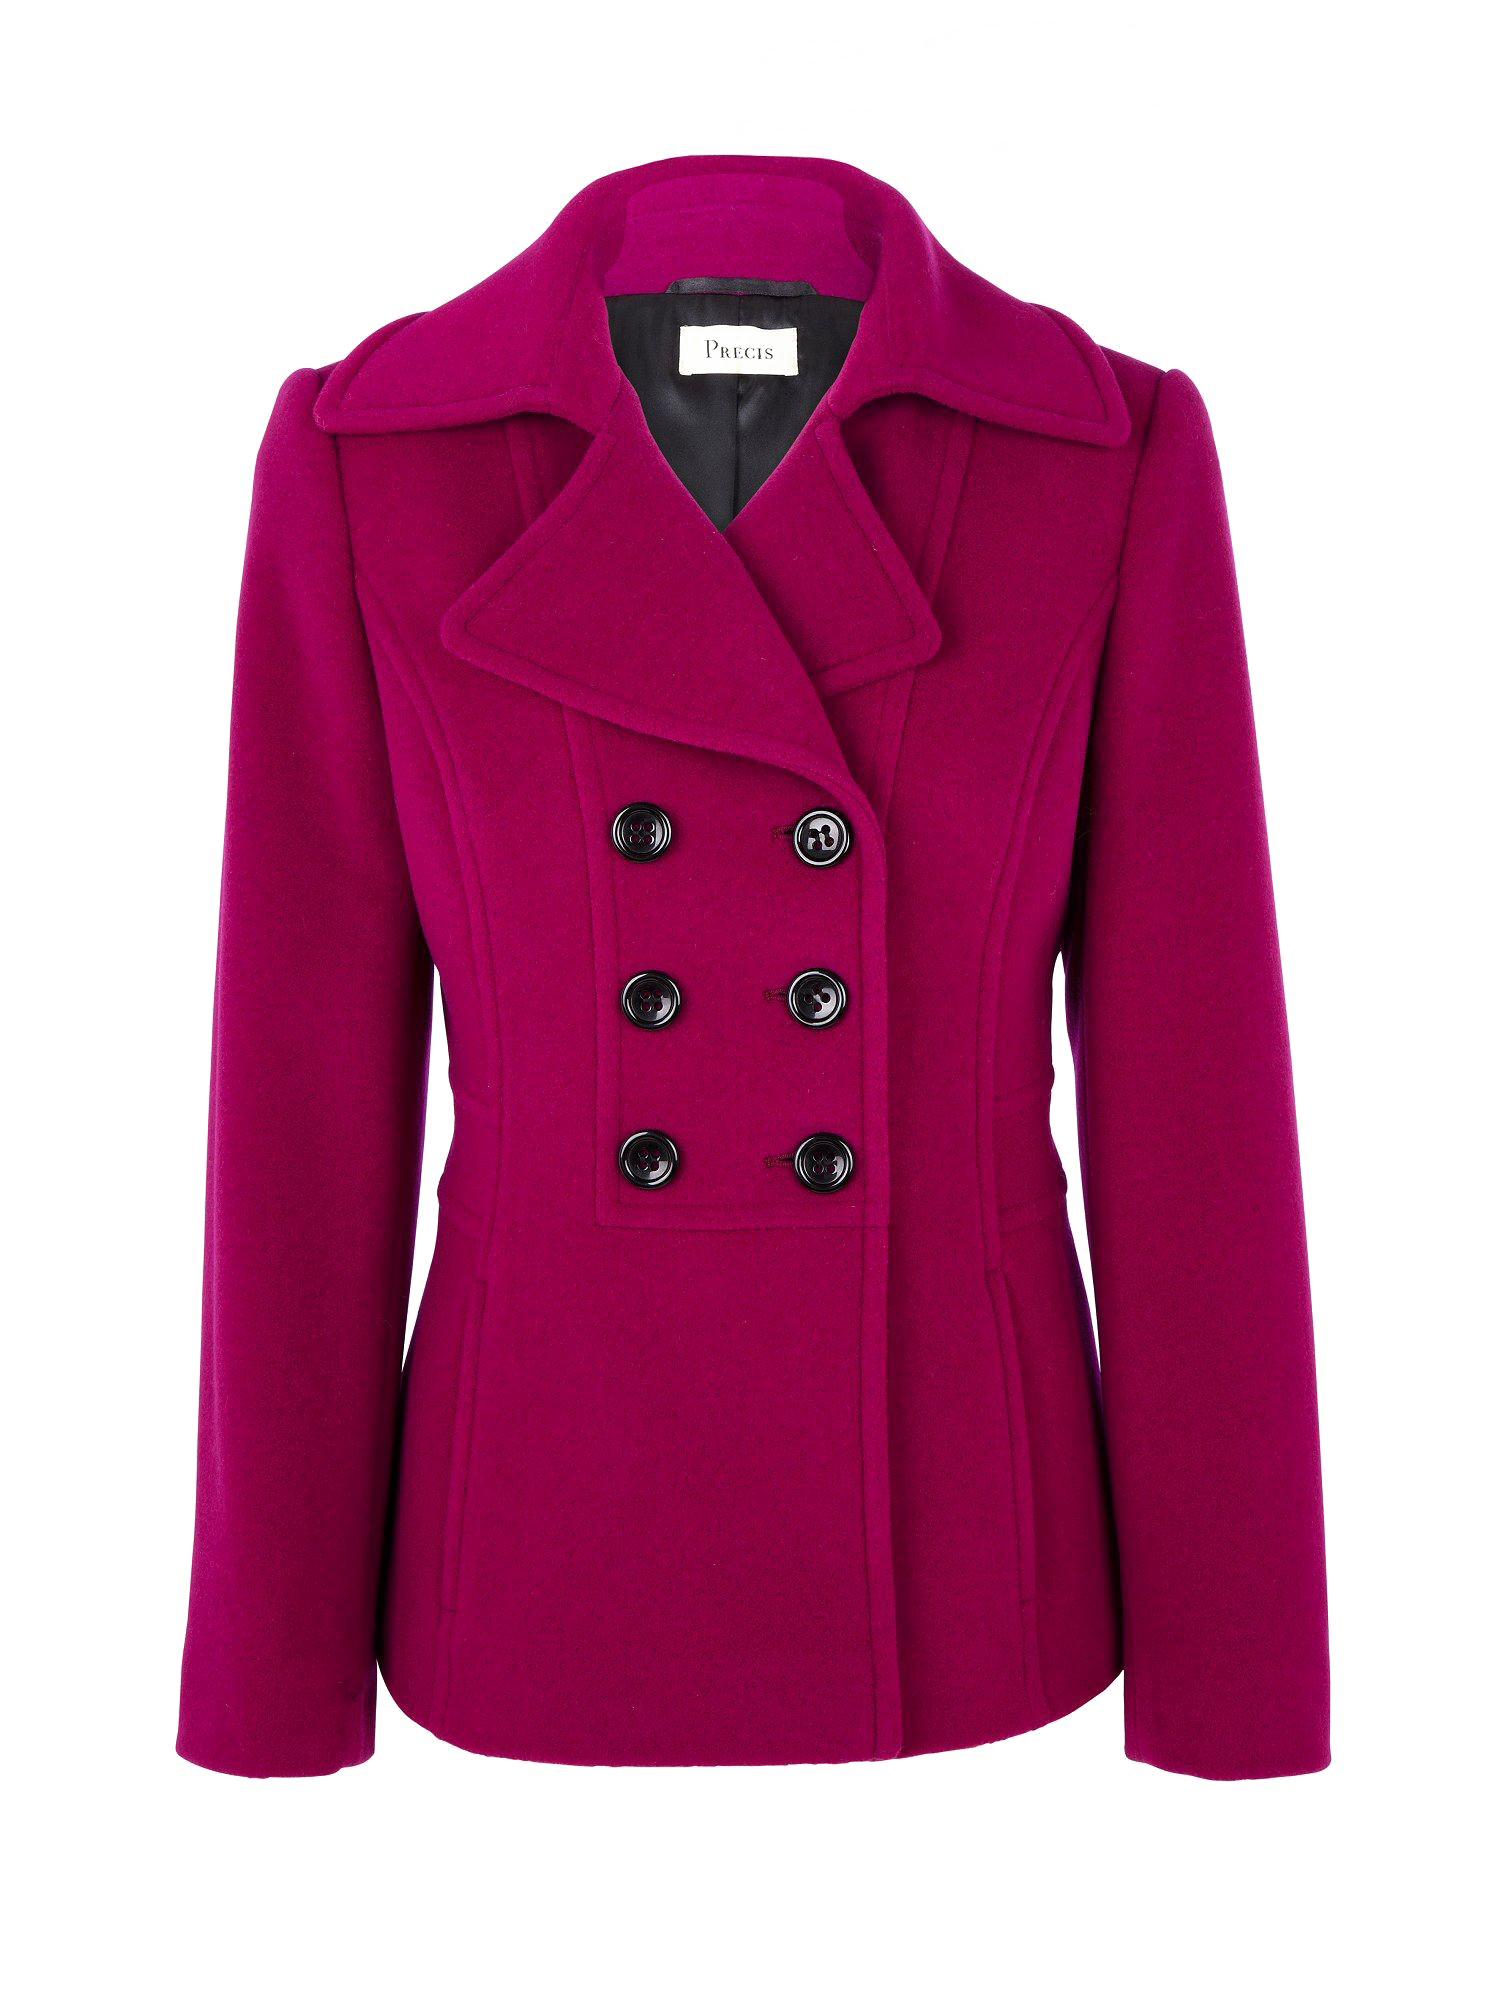 Short Coat For Women PNG Image With Transparent Background